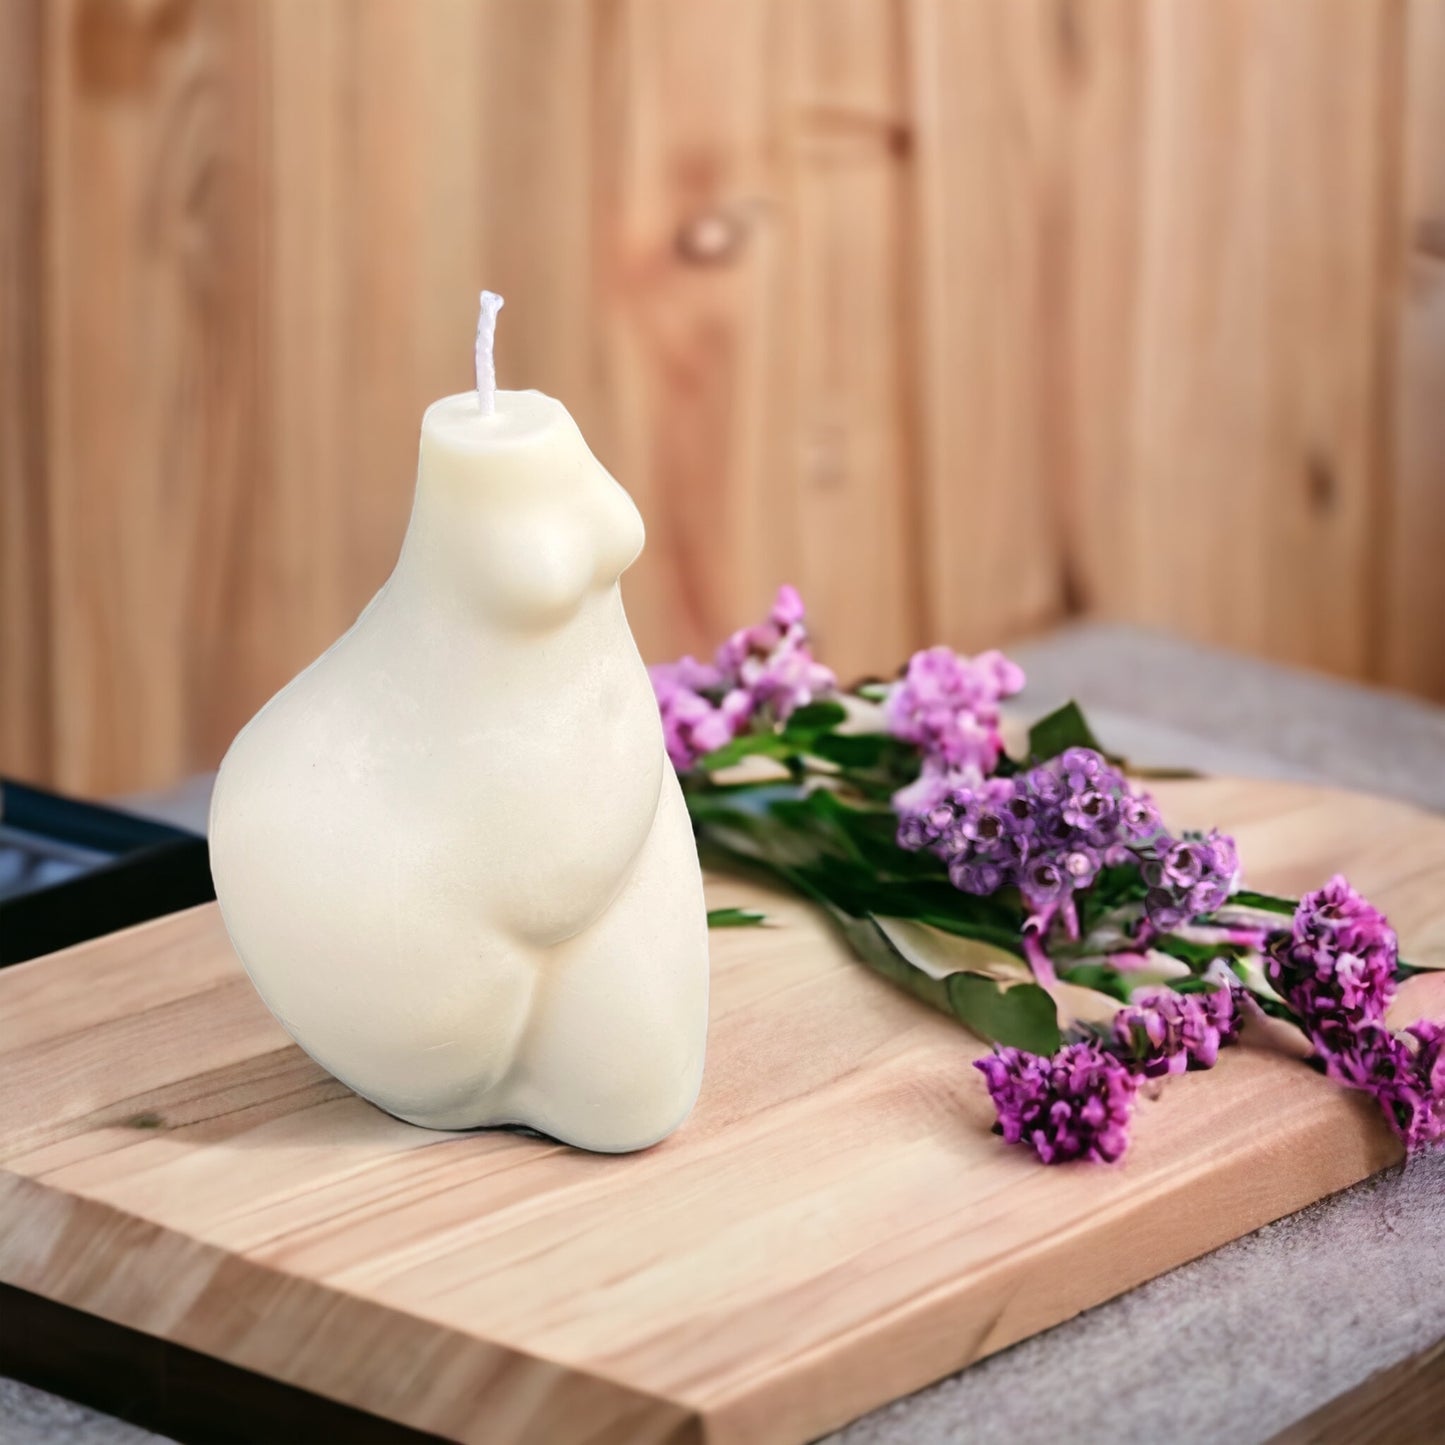 Woman's bust candle